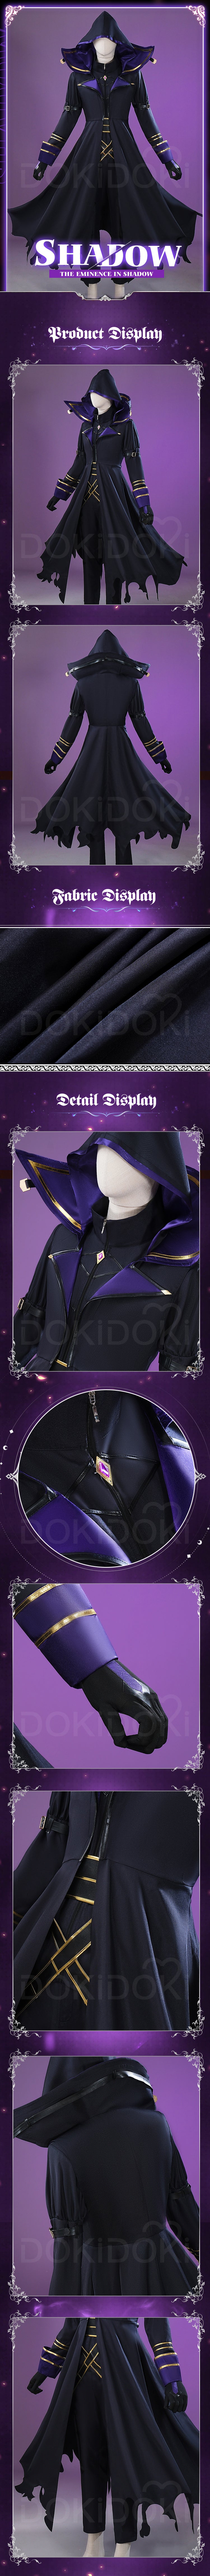 Anime The Eminence in Shadow Cid Kagenou Cosplay Full Outfit Assassin  Costume